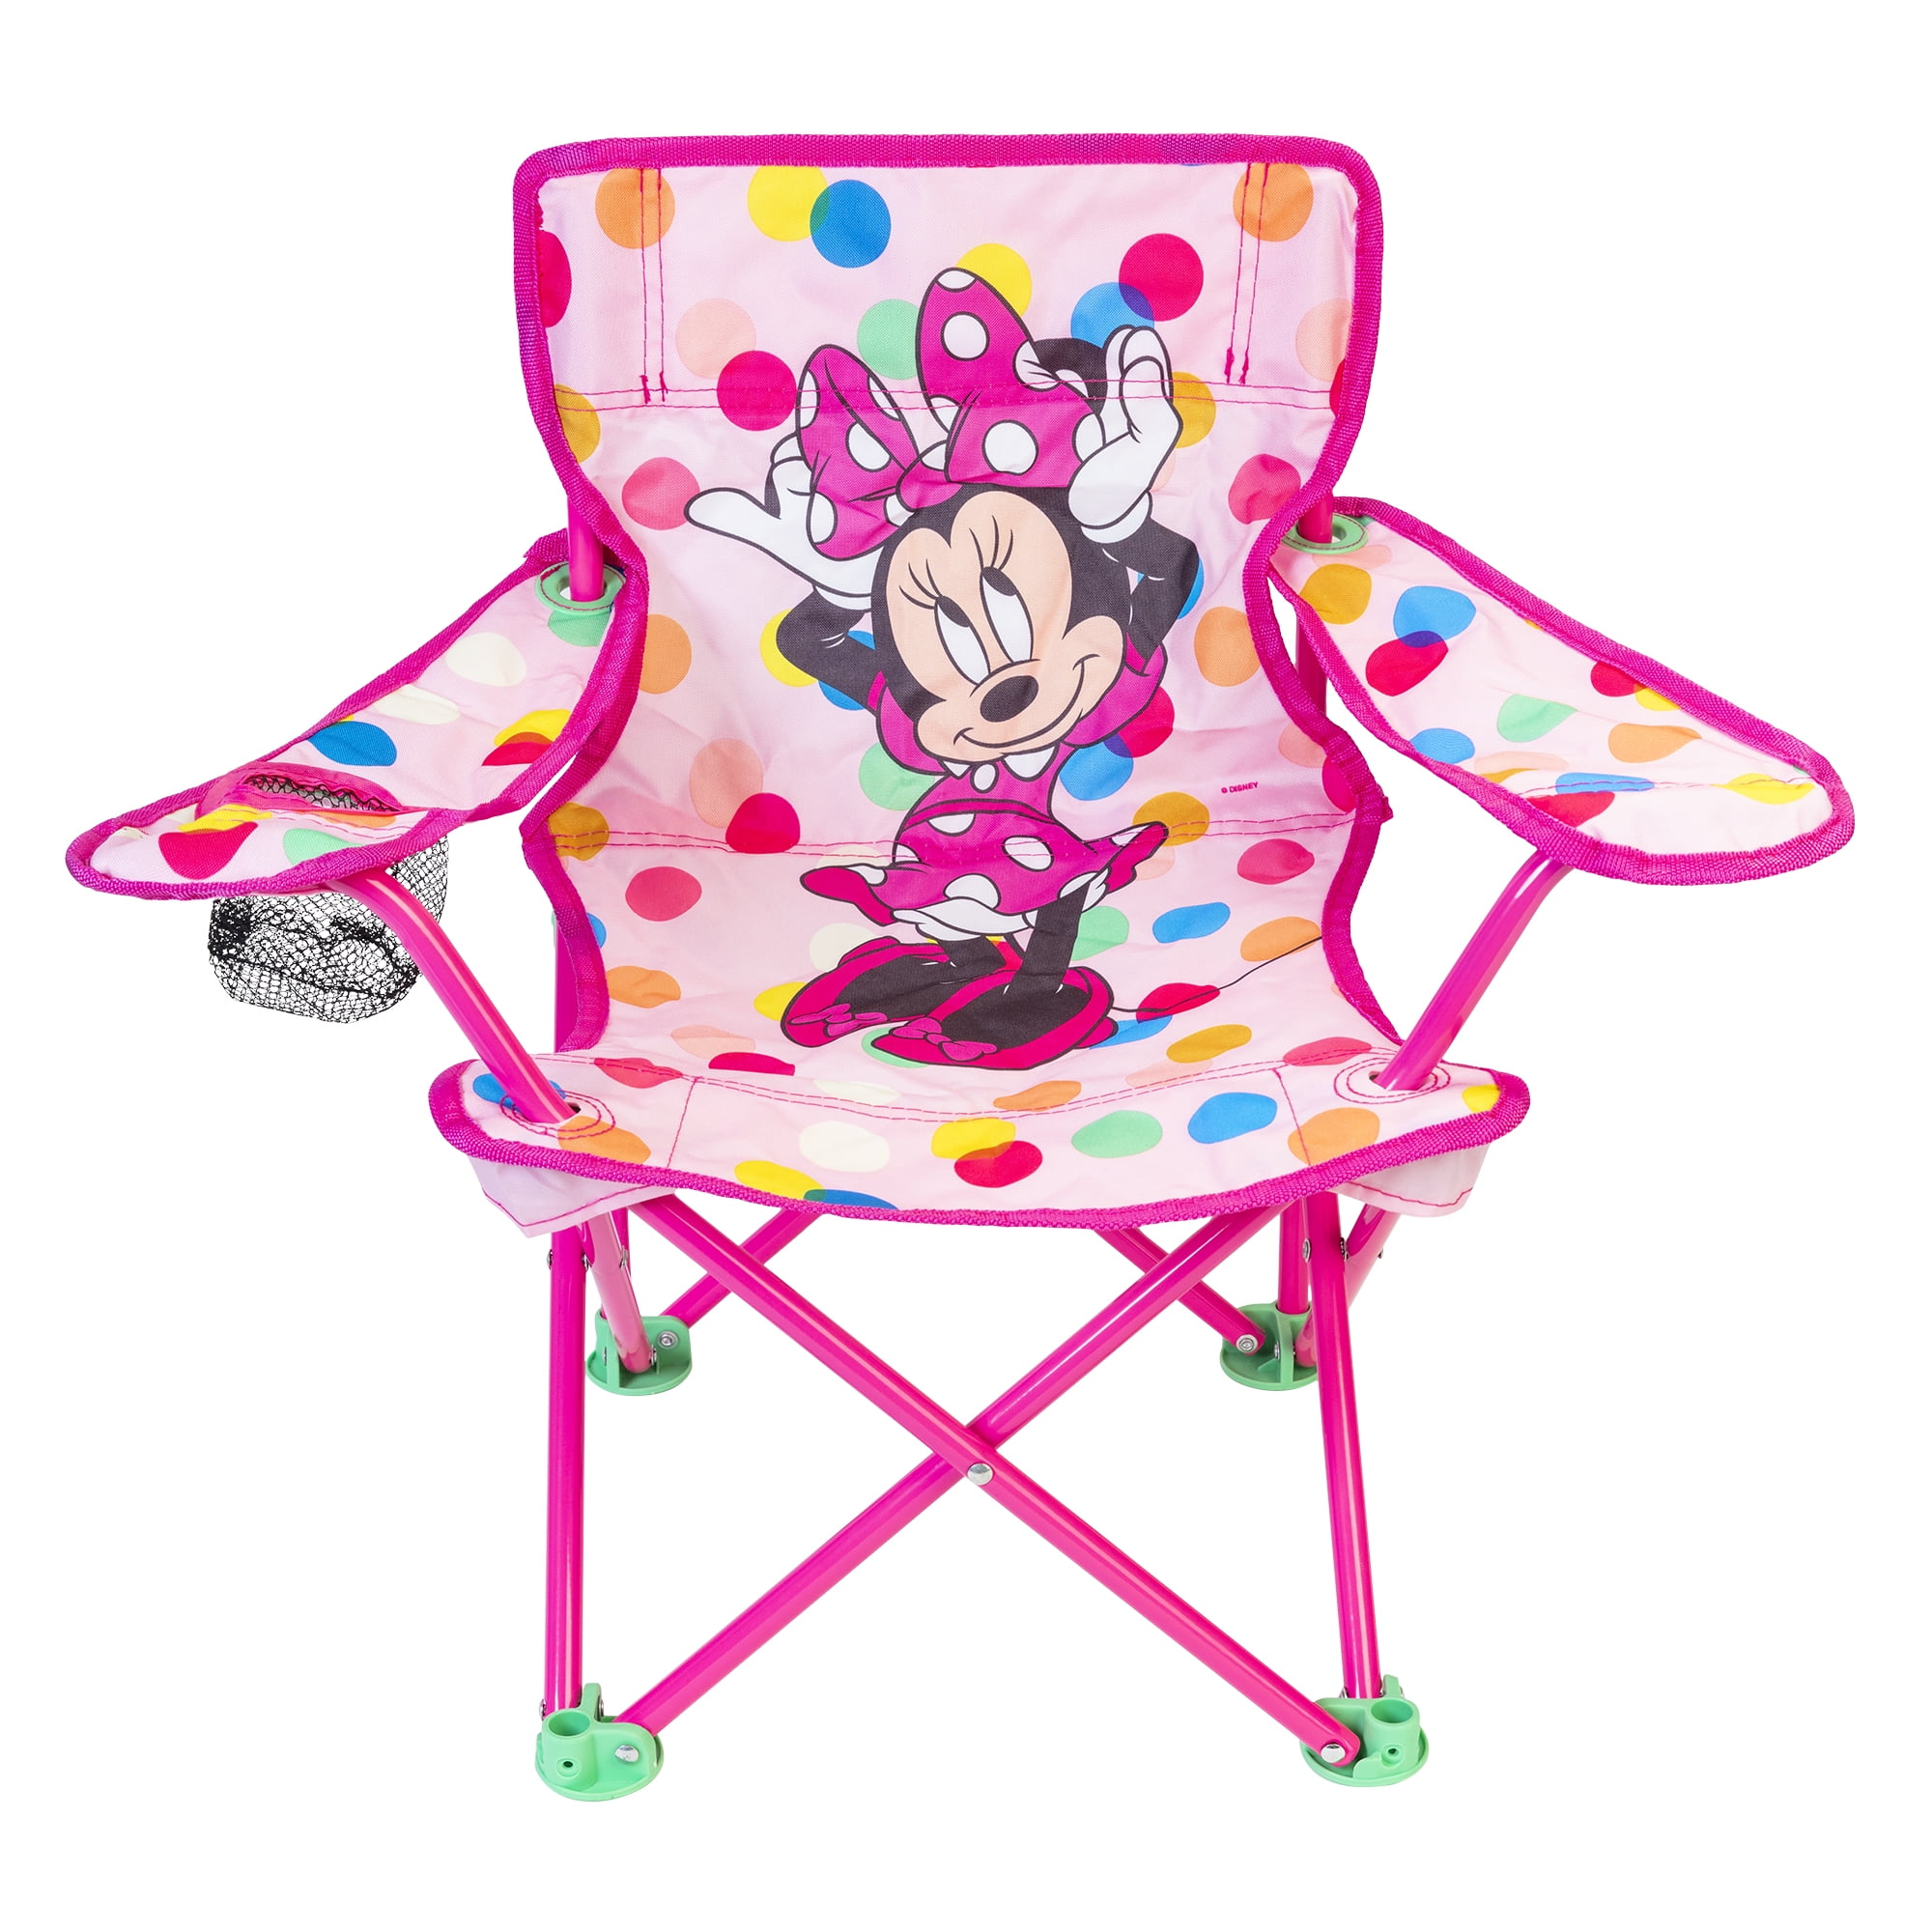 Portable Camping Fold N Go Chair with Carry Bag Minnie Camp Chair for Kids 